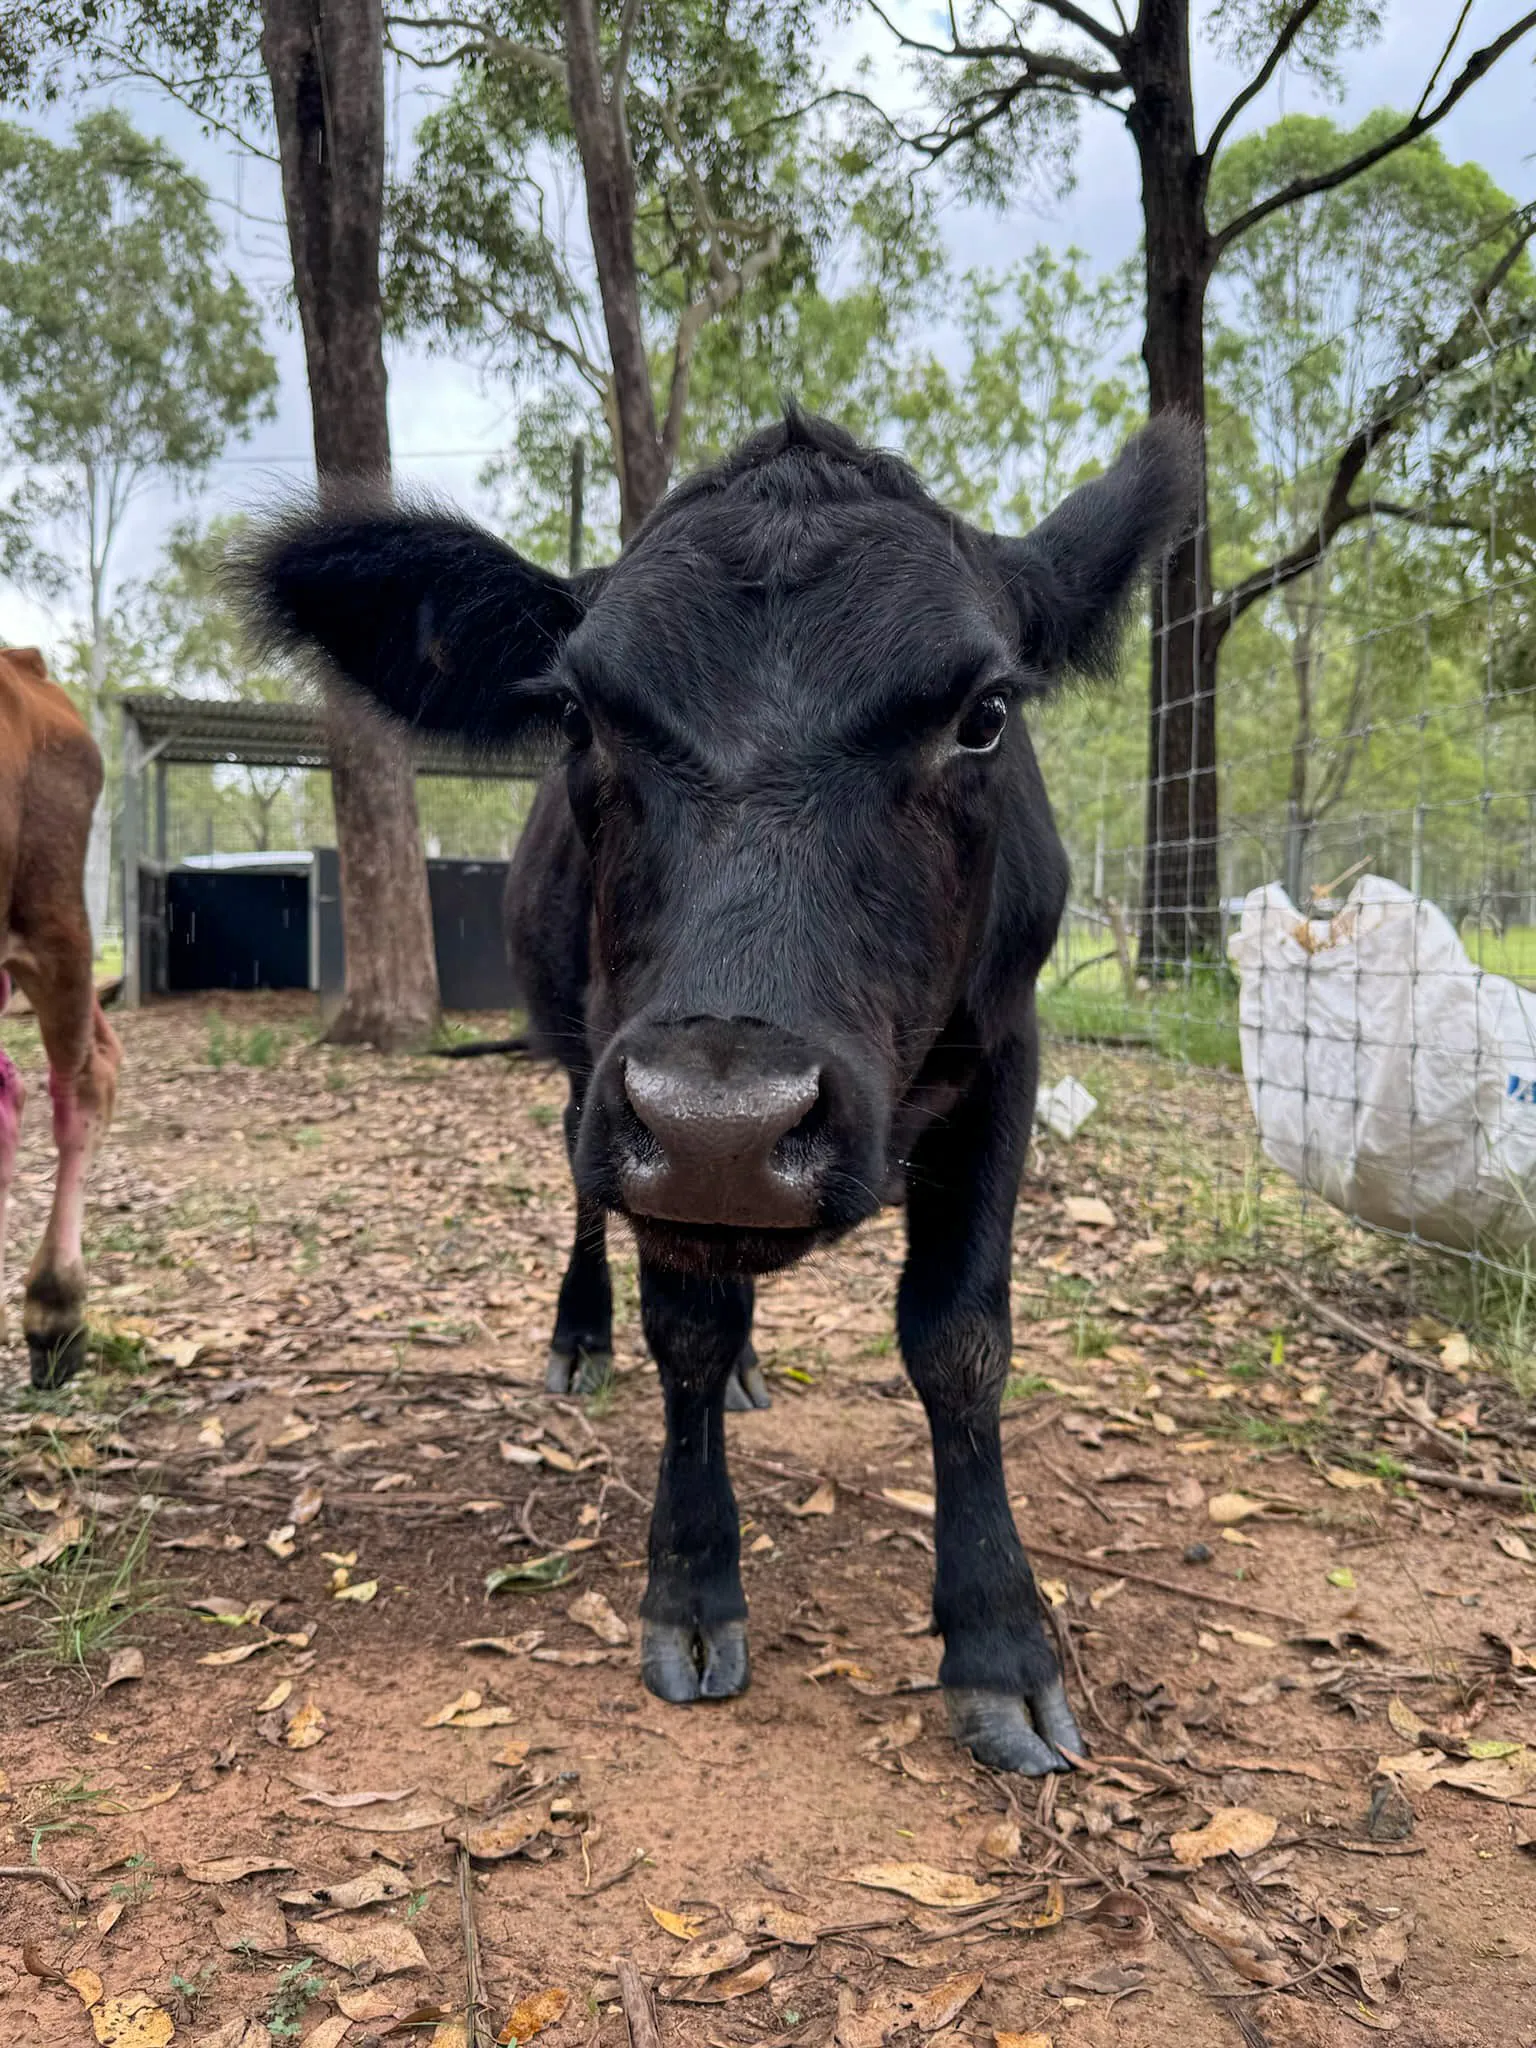 Image of cow named Hero.